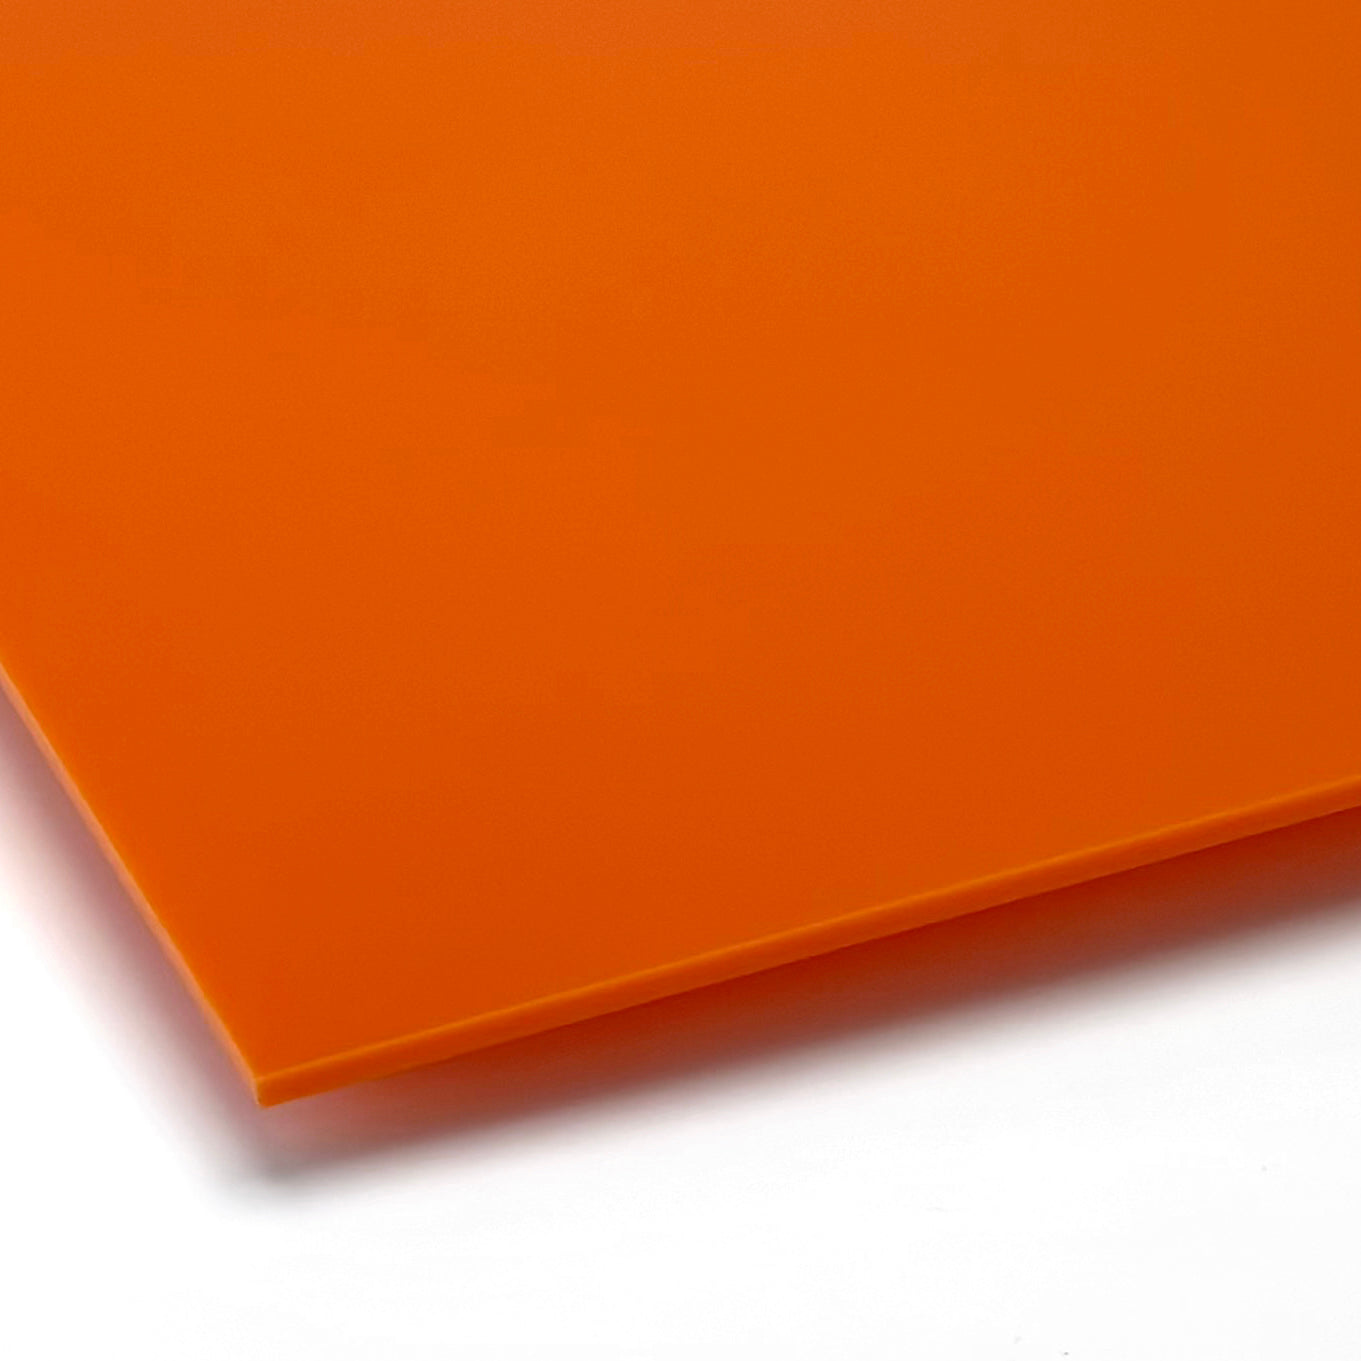 Orange Acrylic with laser cutting only - 600x400mm